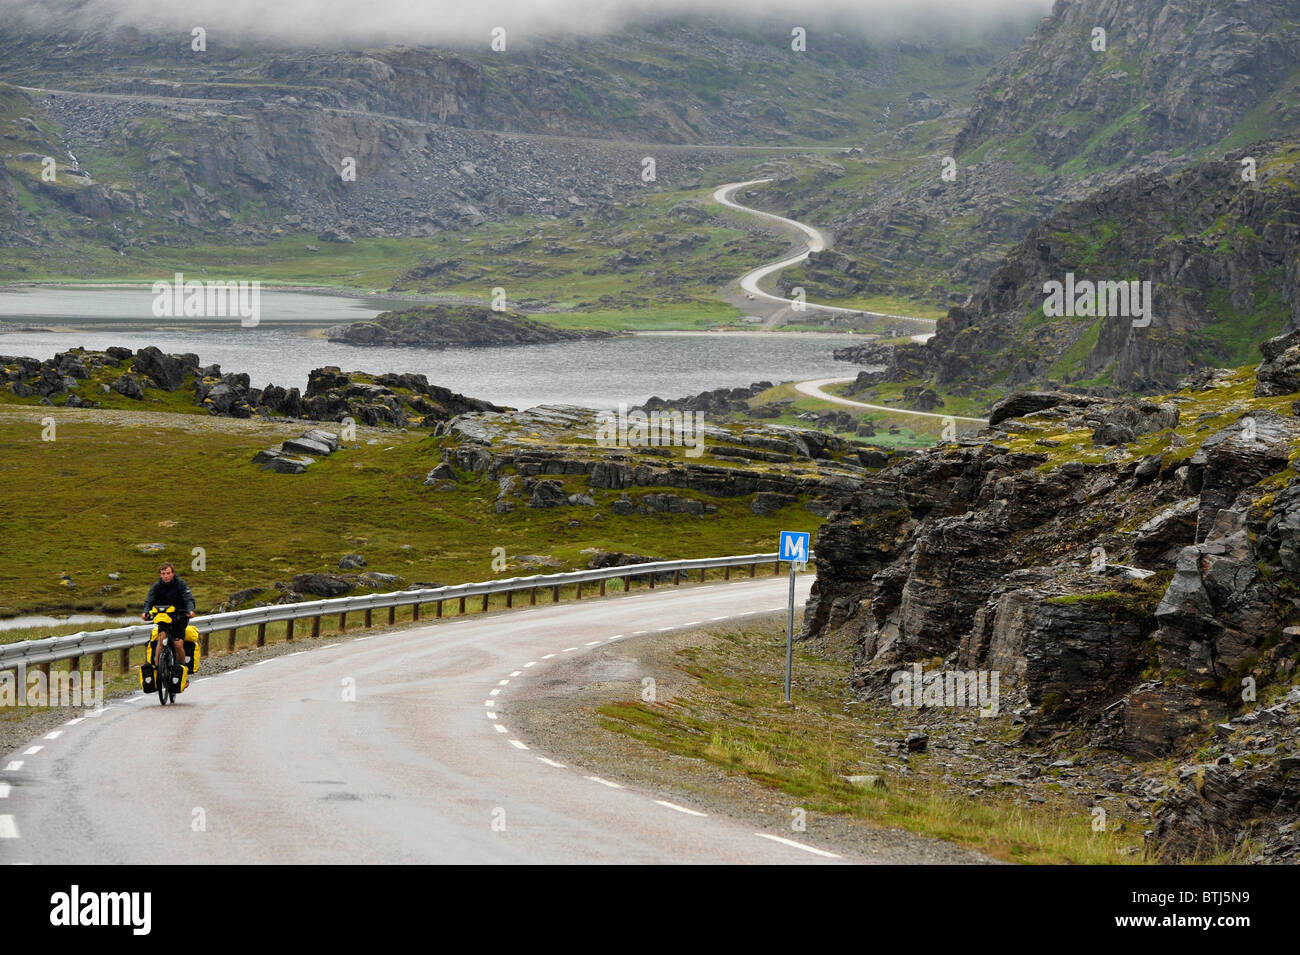 Cyclist on a curvy road in barren landscape. The road to Havøysund, Finnmark, North Norway Stock Photo